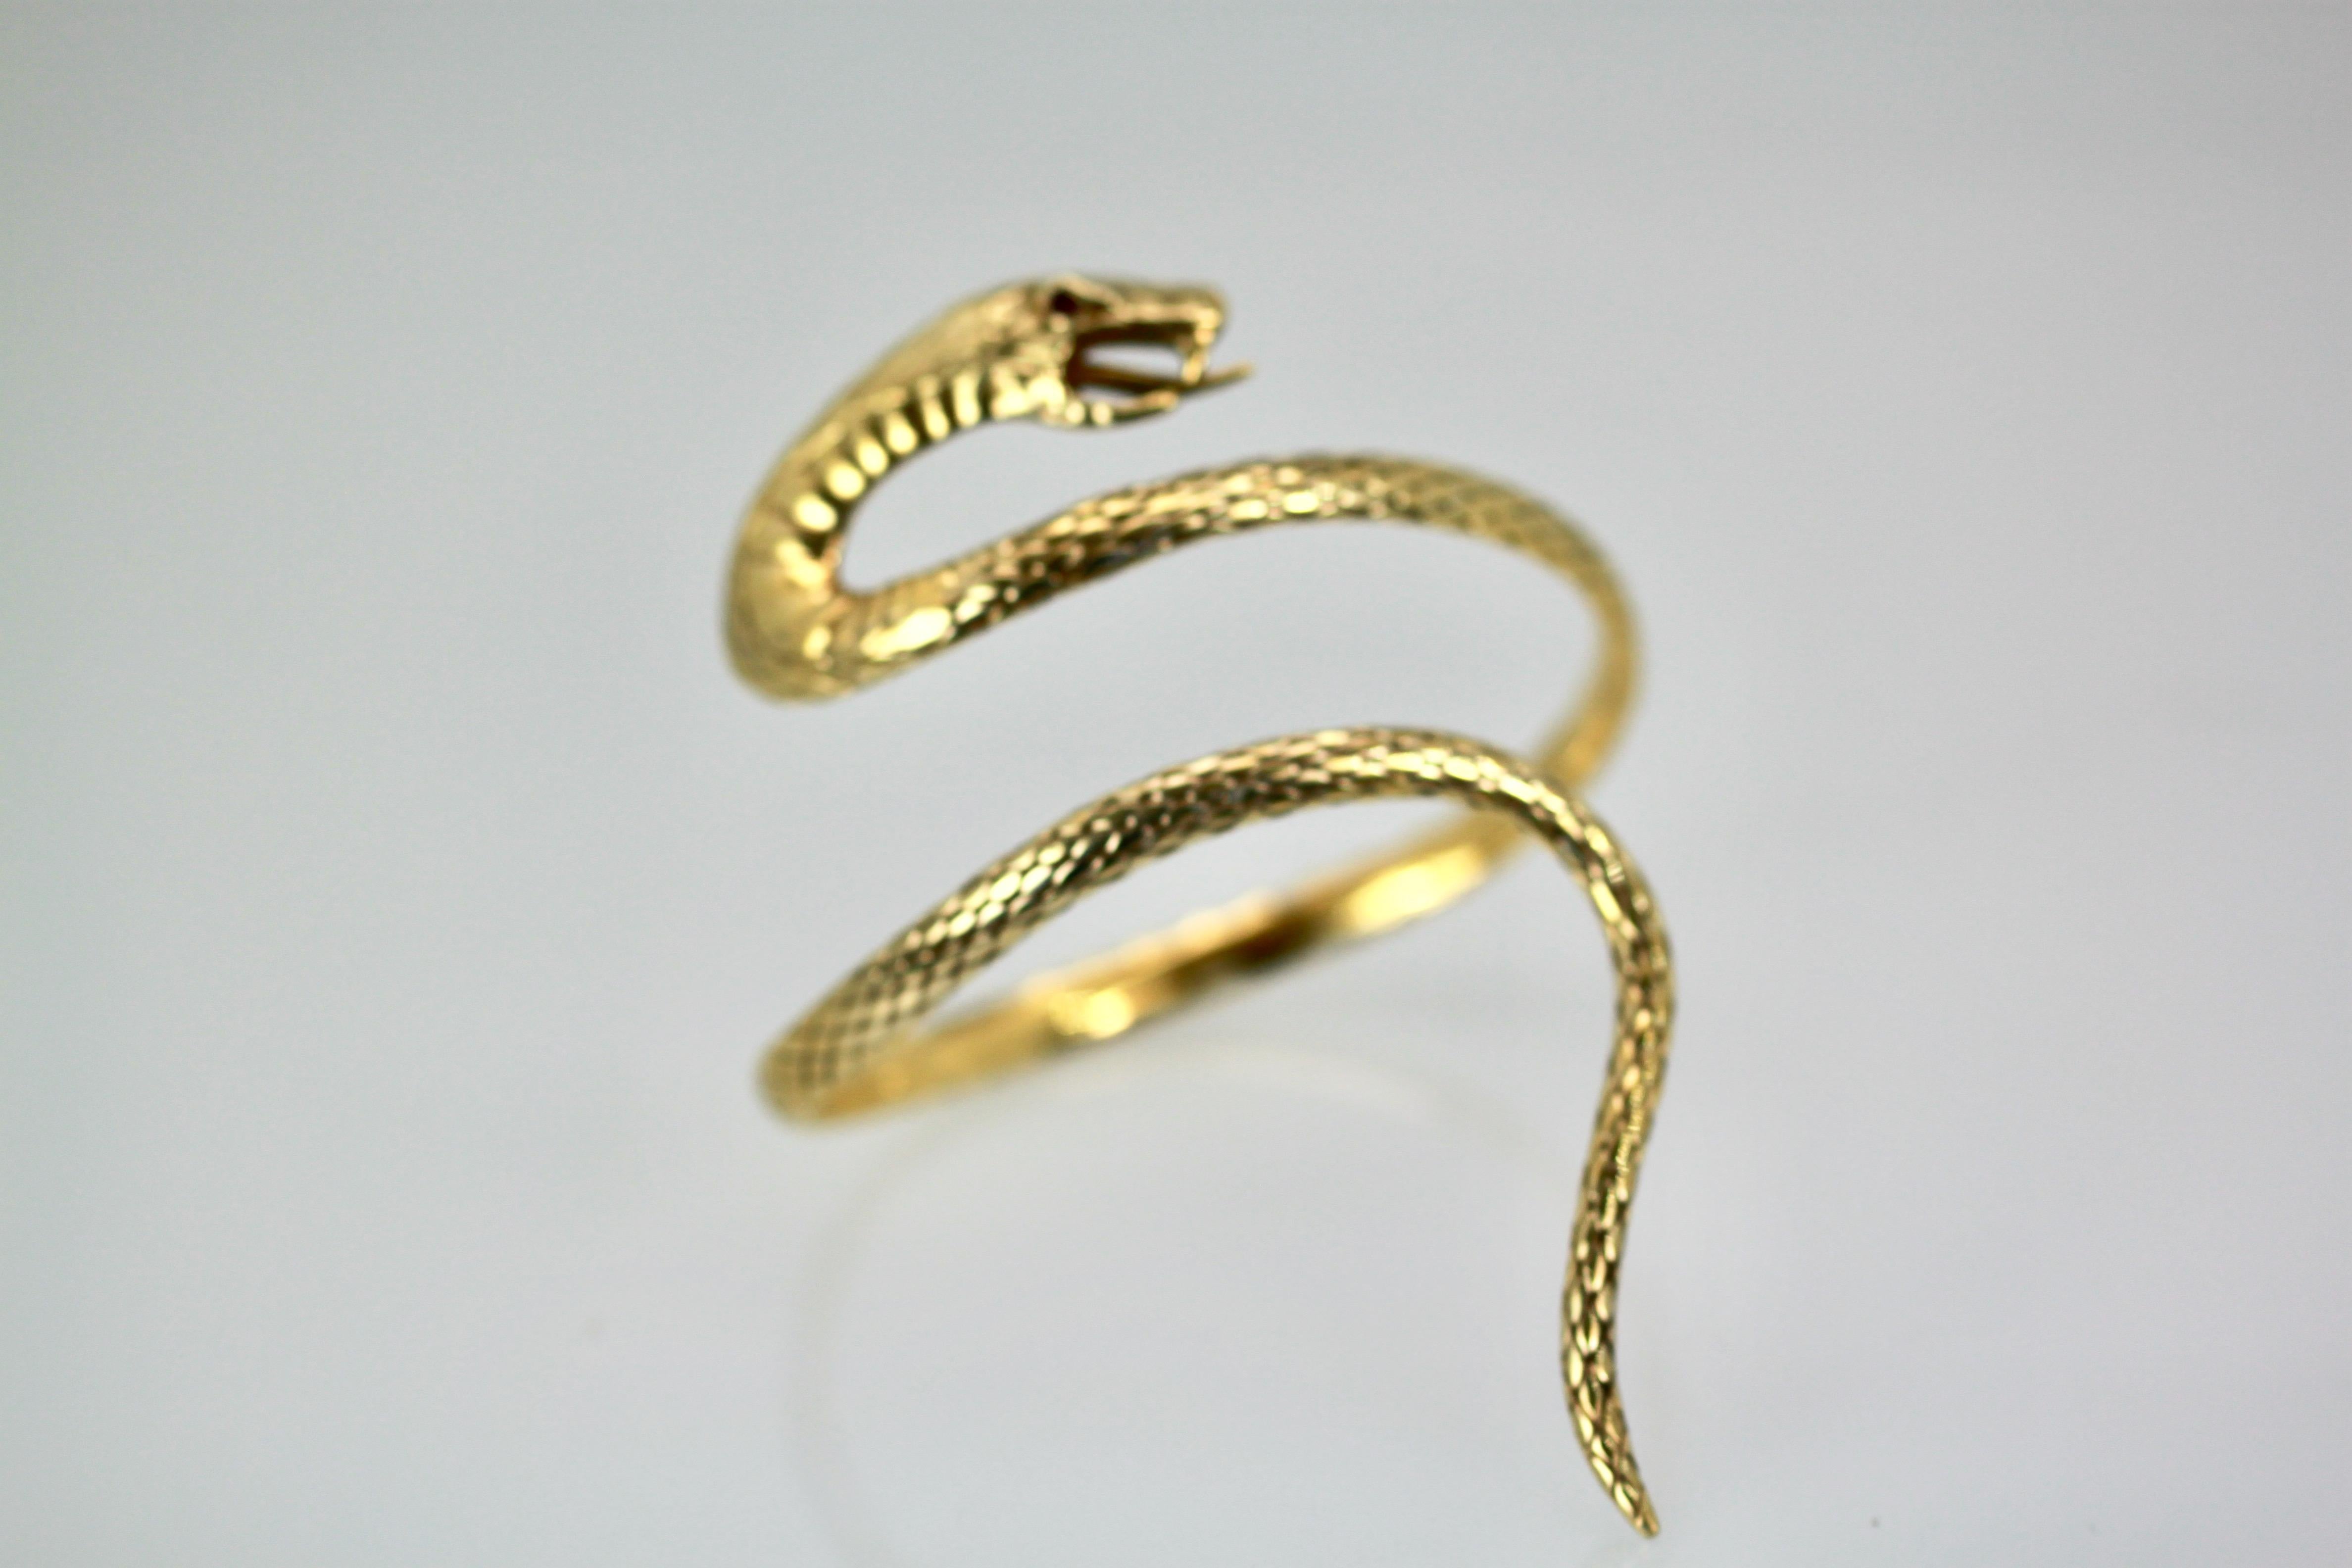 14k Yellow Gold Etched Snake Bracelet Attrib. Stephen Webster In Excellent Condition For Sale In North Hollywood, CA